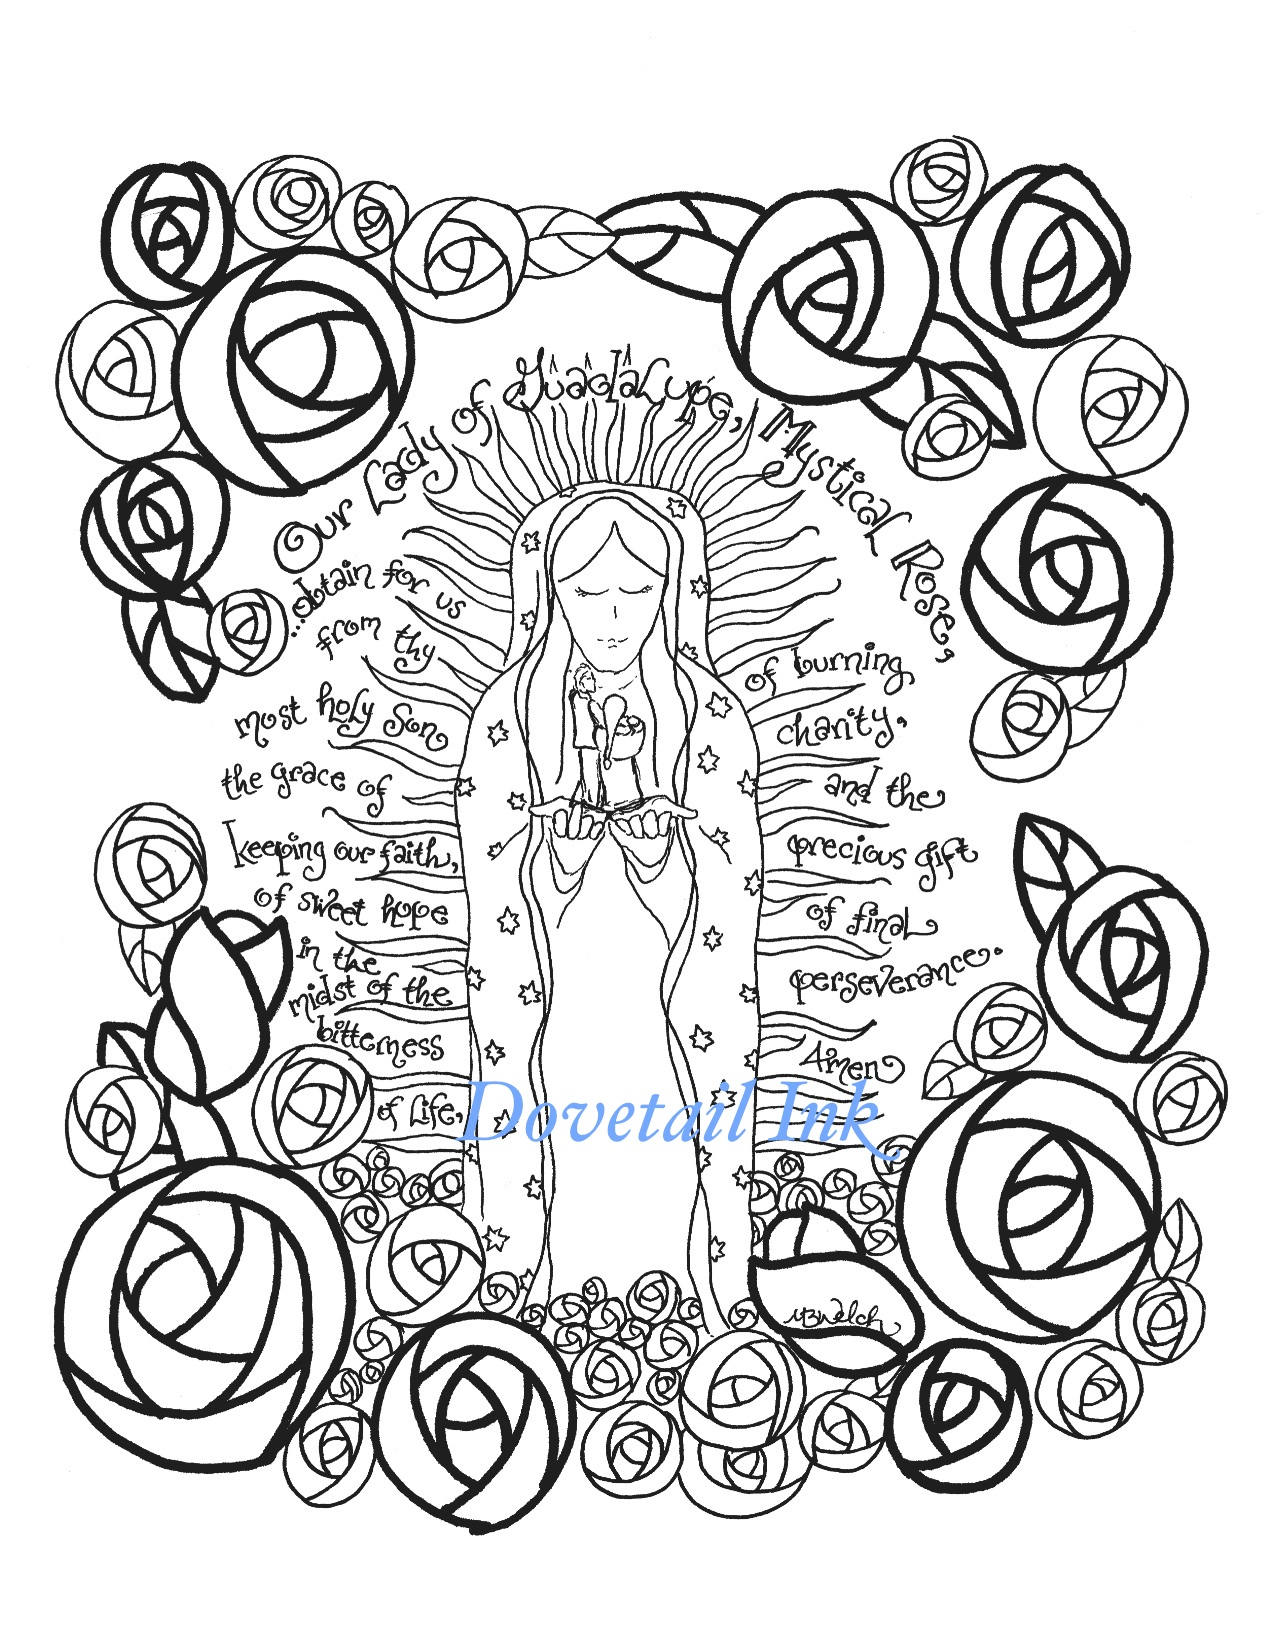 Printable set of our lady of guadalupe prayer and scripture coloring pages for all ages